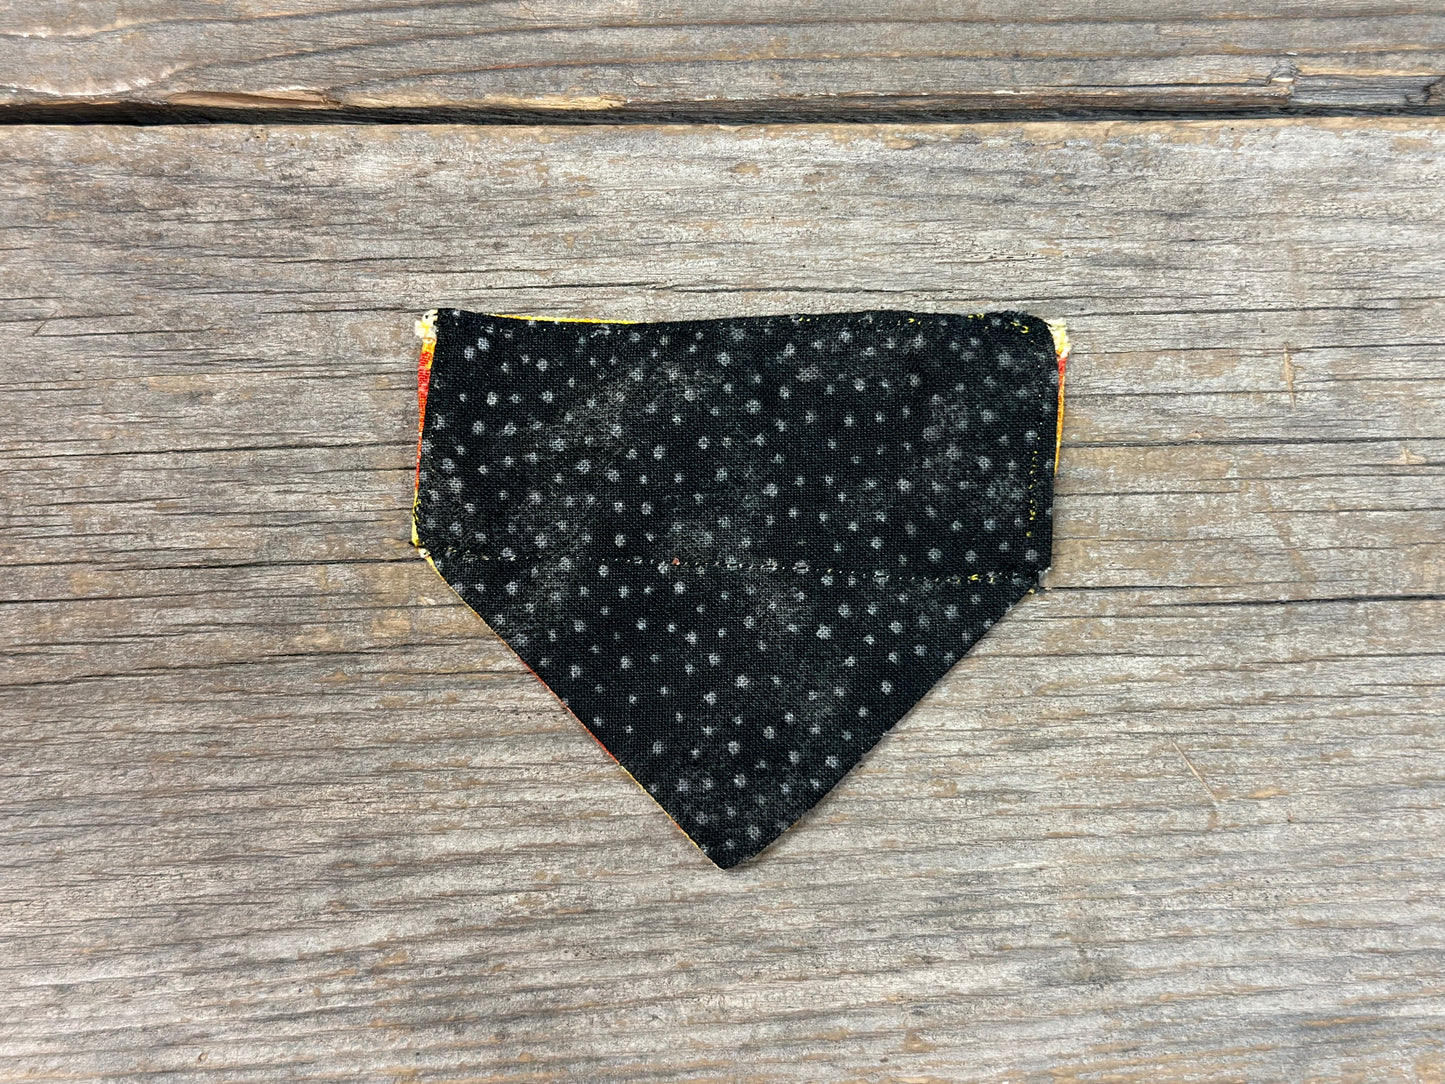 Double-Sided Cat Bandanna - Sunny Days With Coordinating Black and Grey Polka Dots